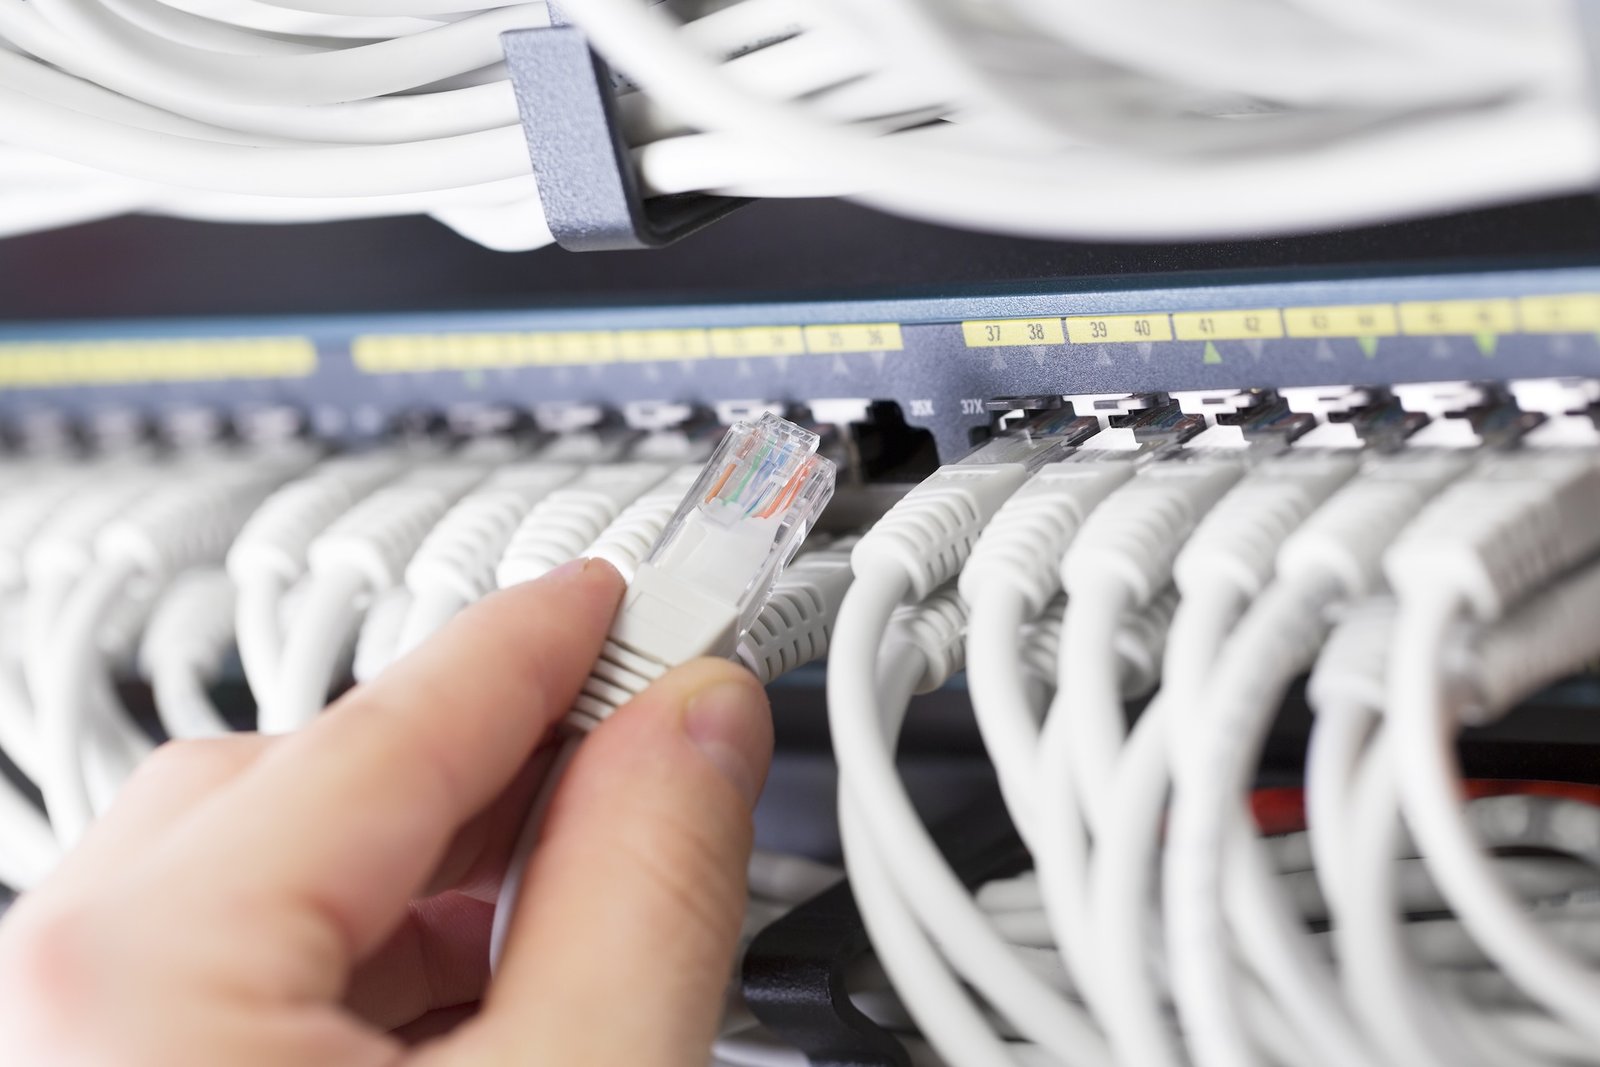 It consultant insert gigabit ethernet network cat 5, 5e, 6 patch cable into switch in datacenter.